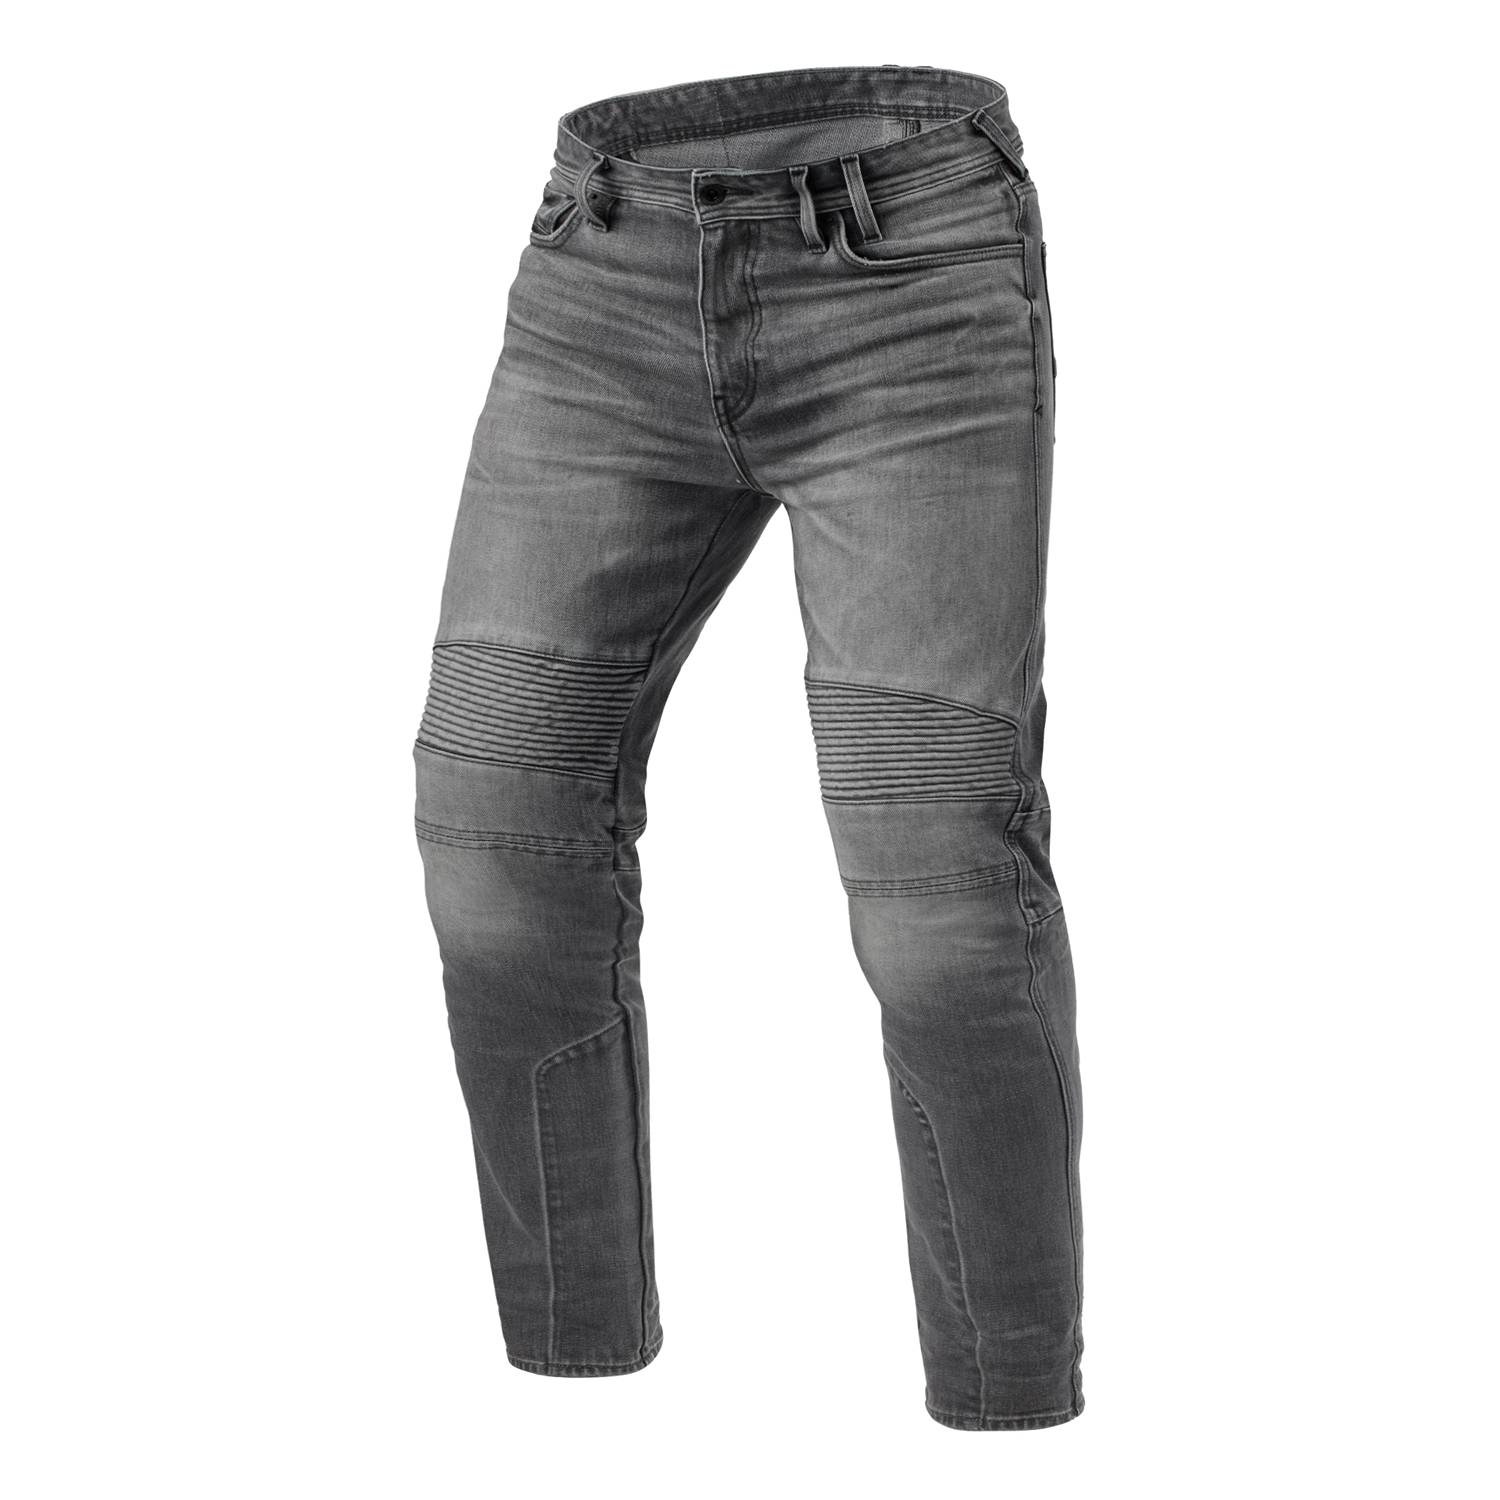 Image of REV'IT! Jeans Moto 2 TF Medium Grey Used L34 Motorcycle Jeans Taille L34/W28